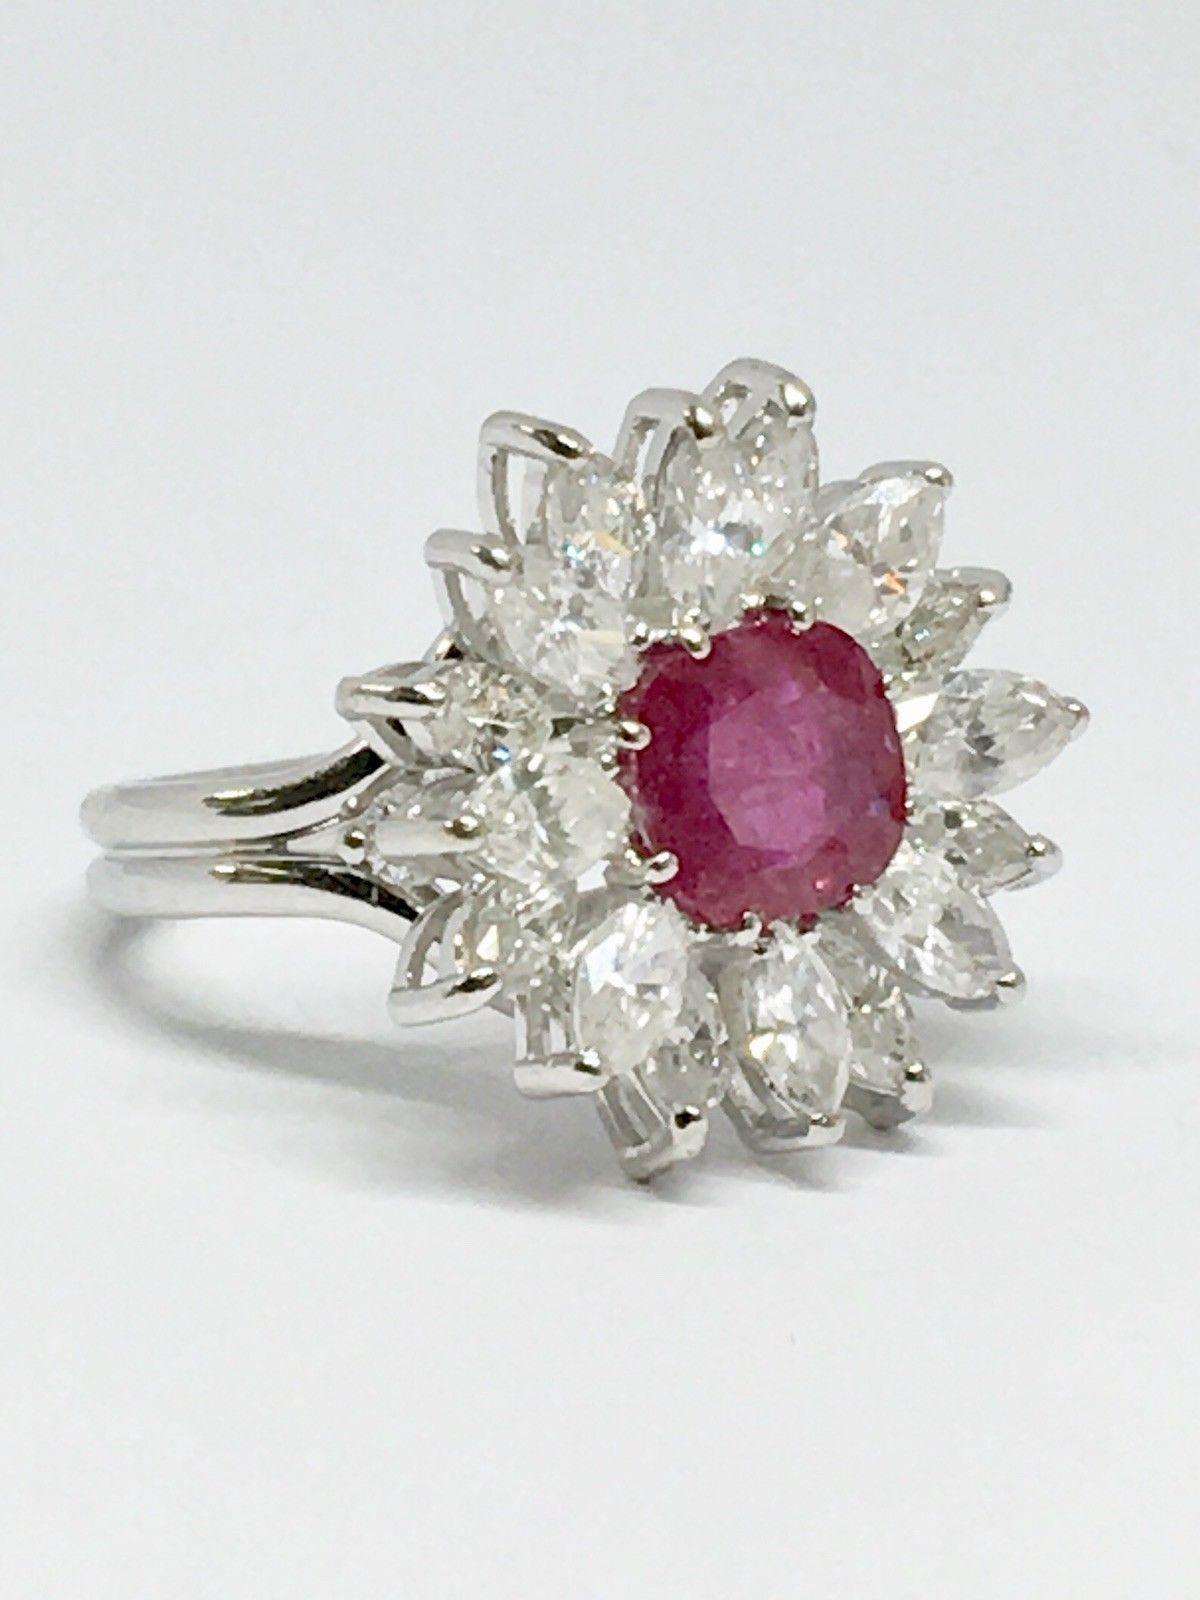 Cushion Cut Retro Midcentury 1950s 4.30 Carat Red Ruby VS Diamond Halo Cluster Cocktail Ring